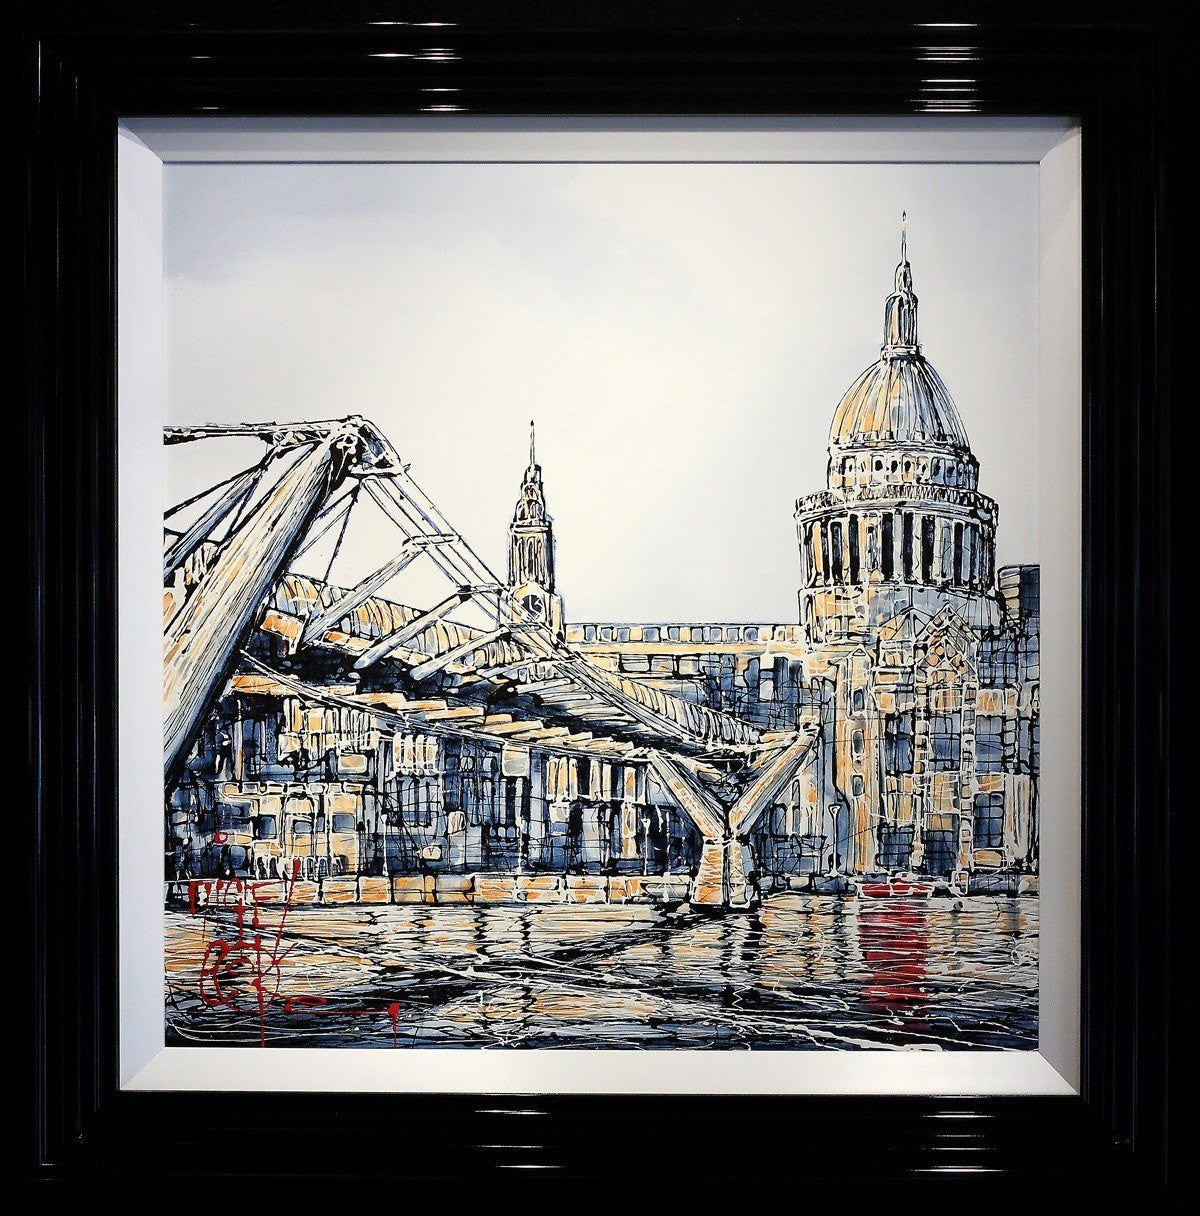 From the Tate to St. Paul's - SOLD Nigel Cooke